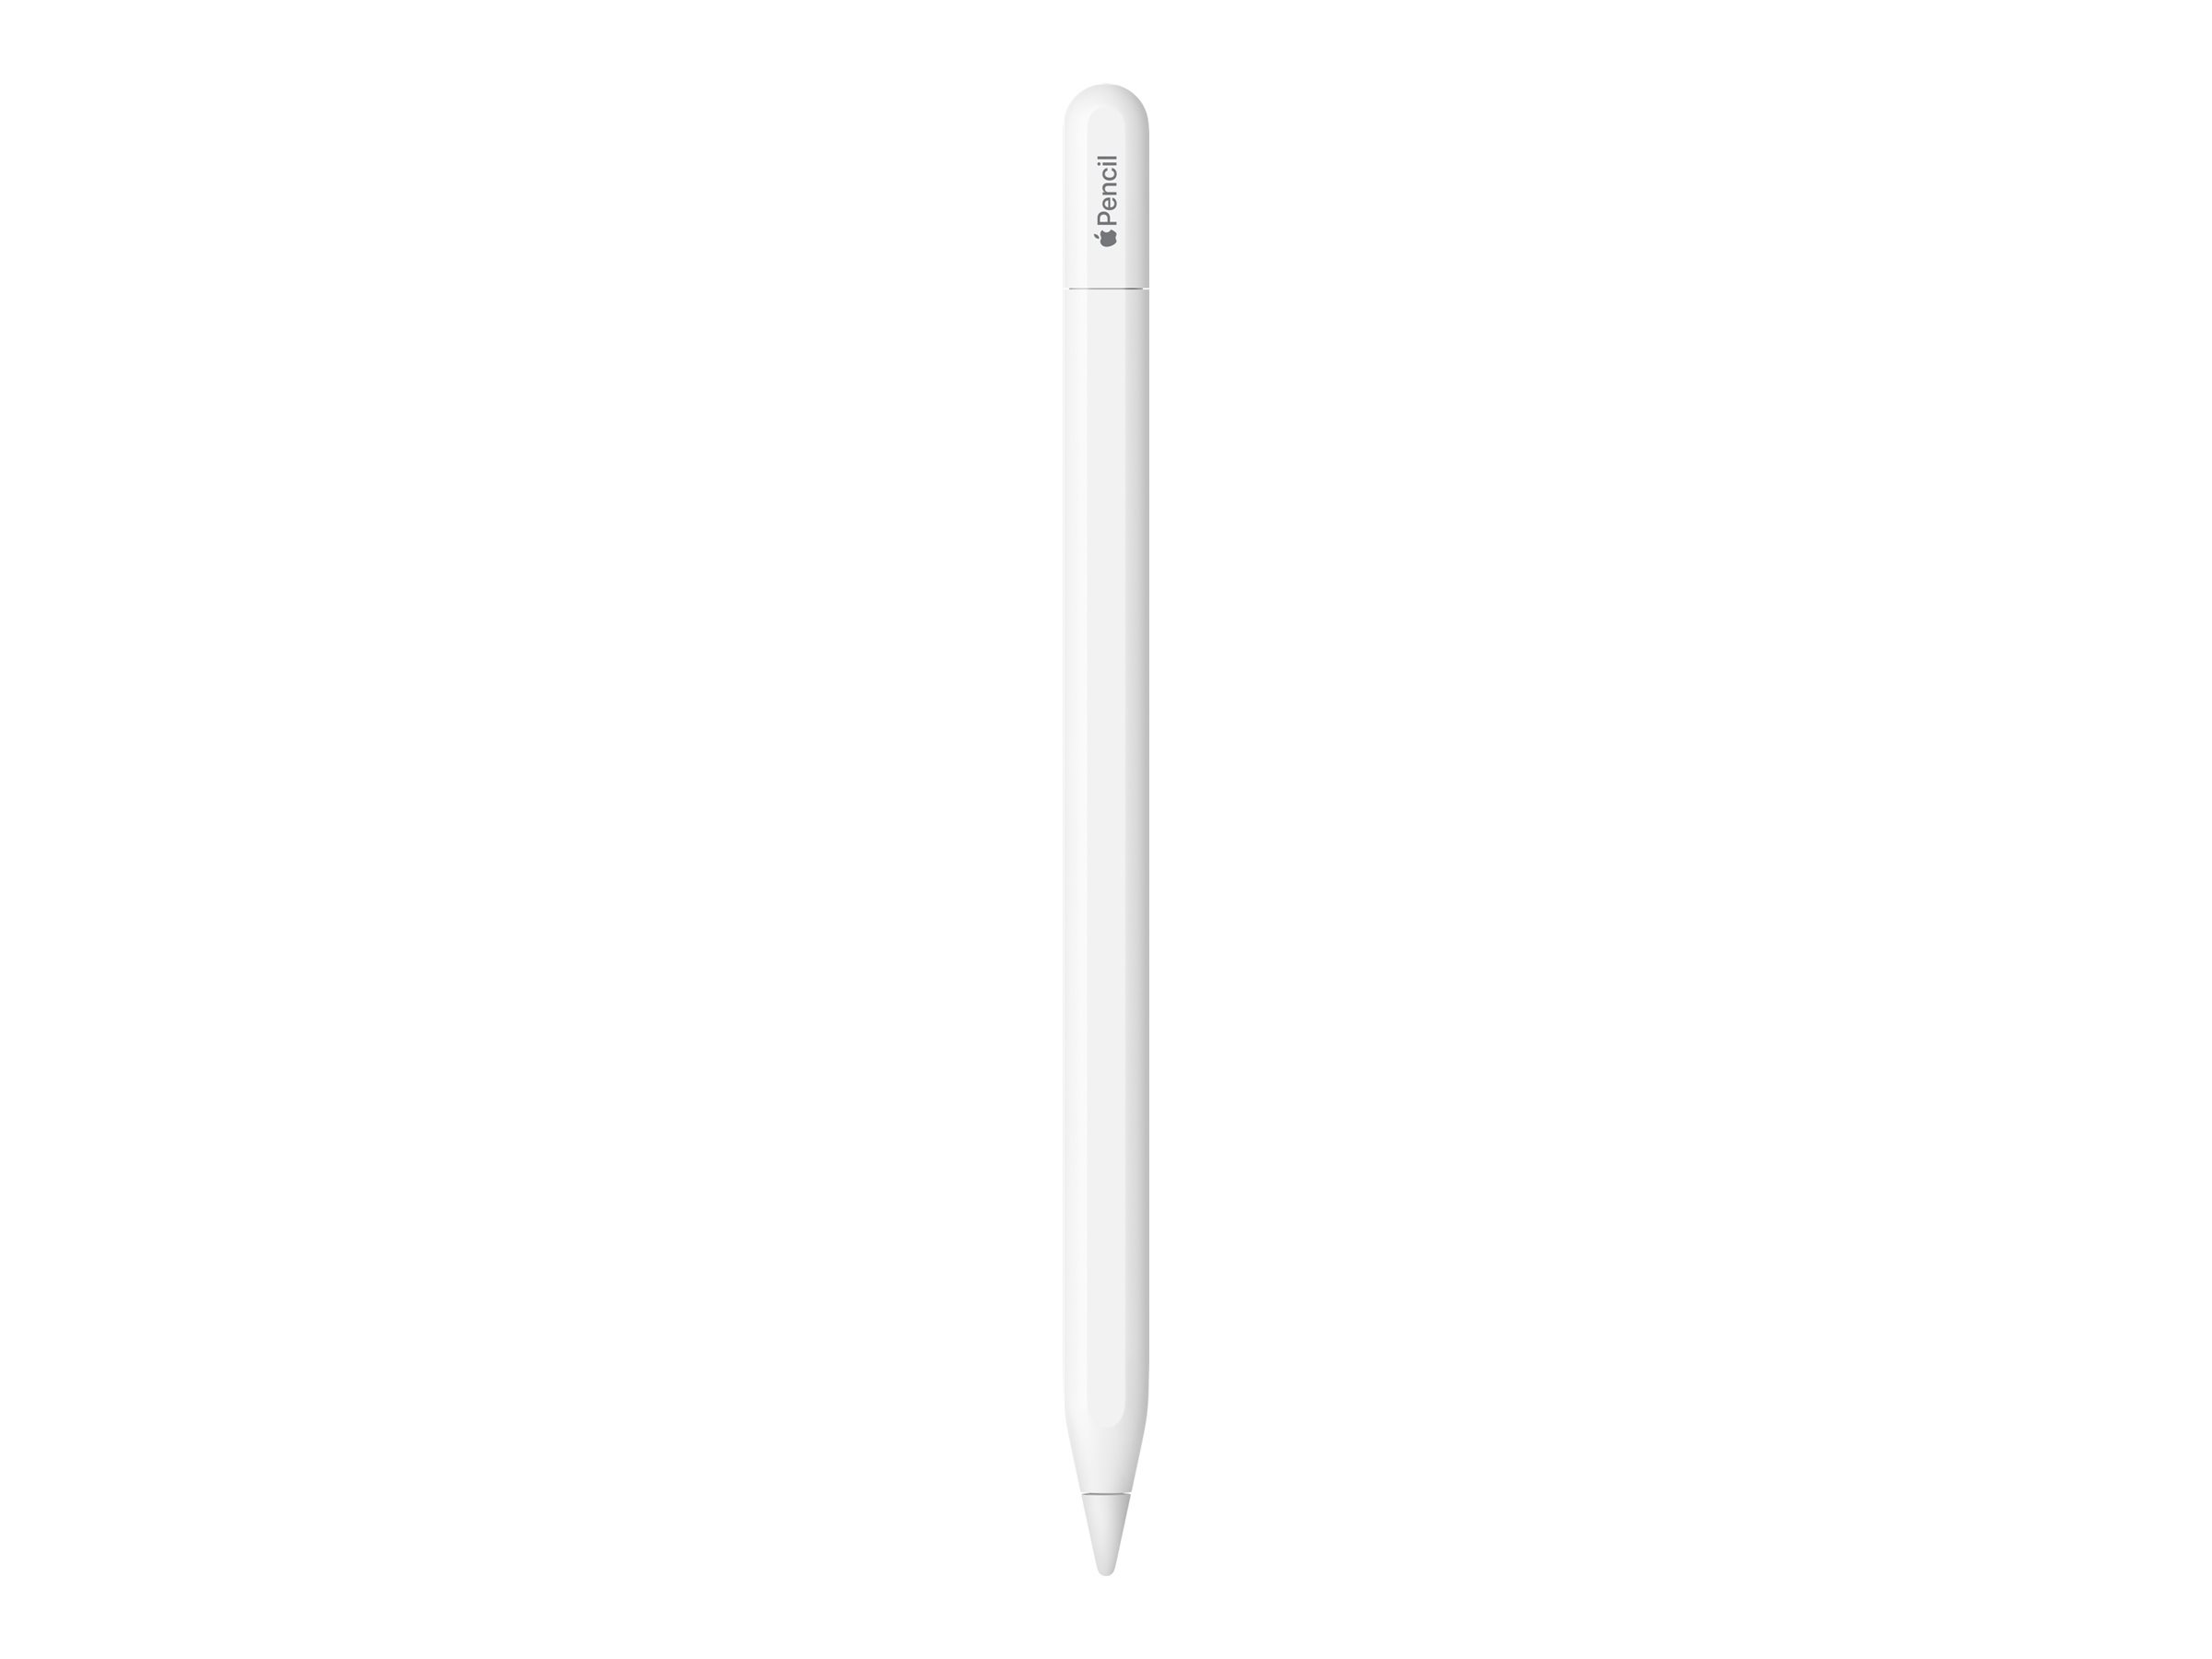 Apple Pencil - Stylus for tablet